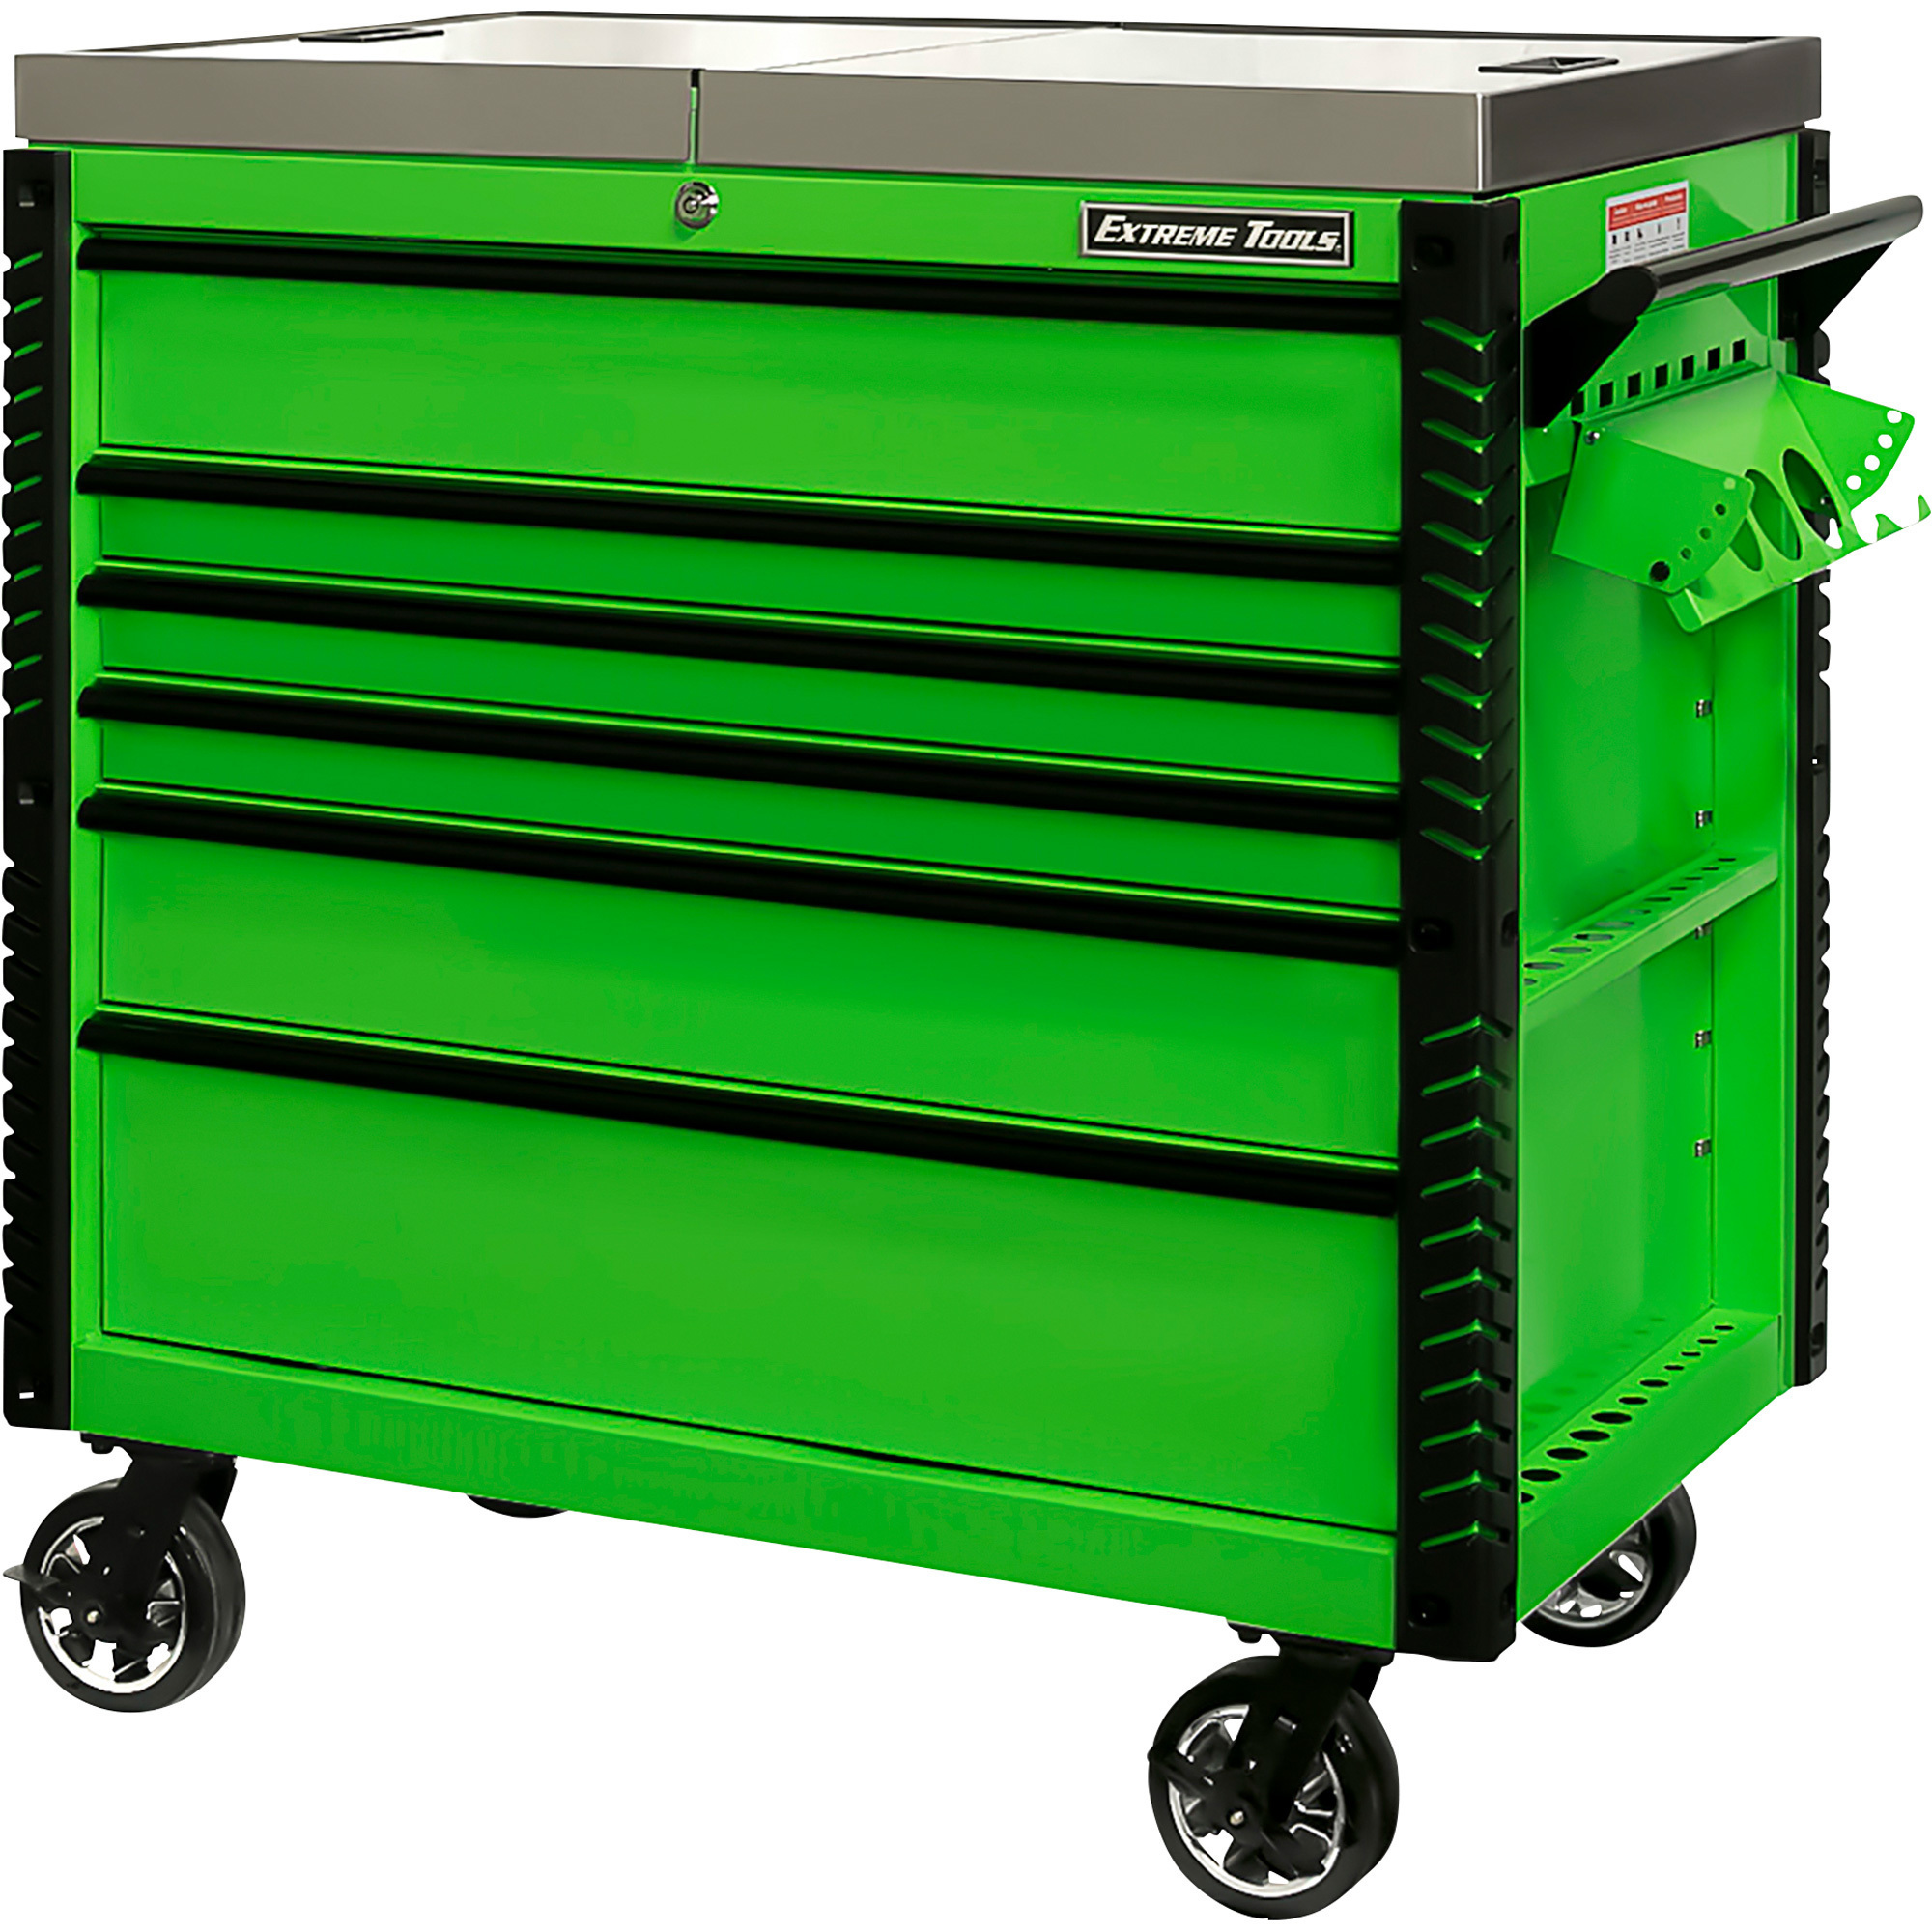 Extreme Tools EX Professional Series 41Inch 6 Drawer Stainless Steel Sliding Top Tool Cart — 41.75Inch W x 25.75Inch D x 43.875Inch H, Green with -  EX4106TCSGNBK